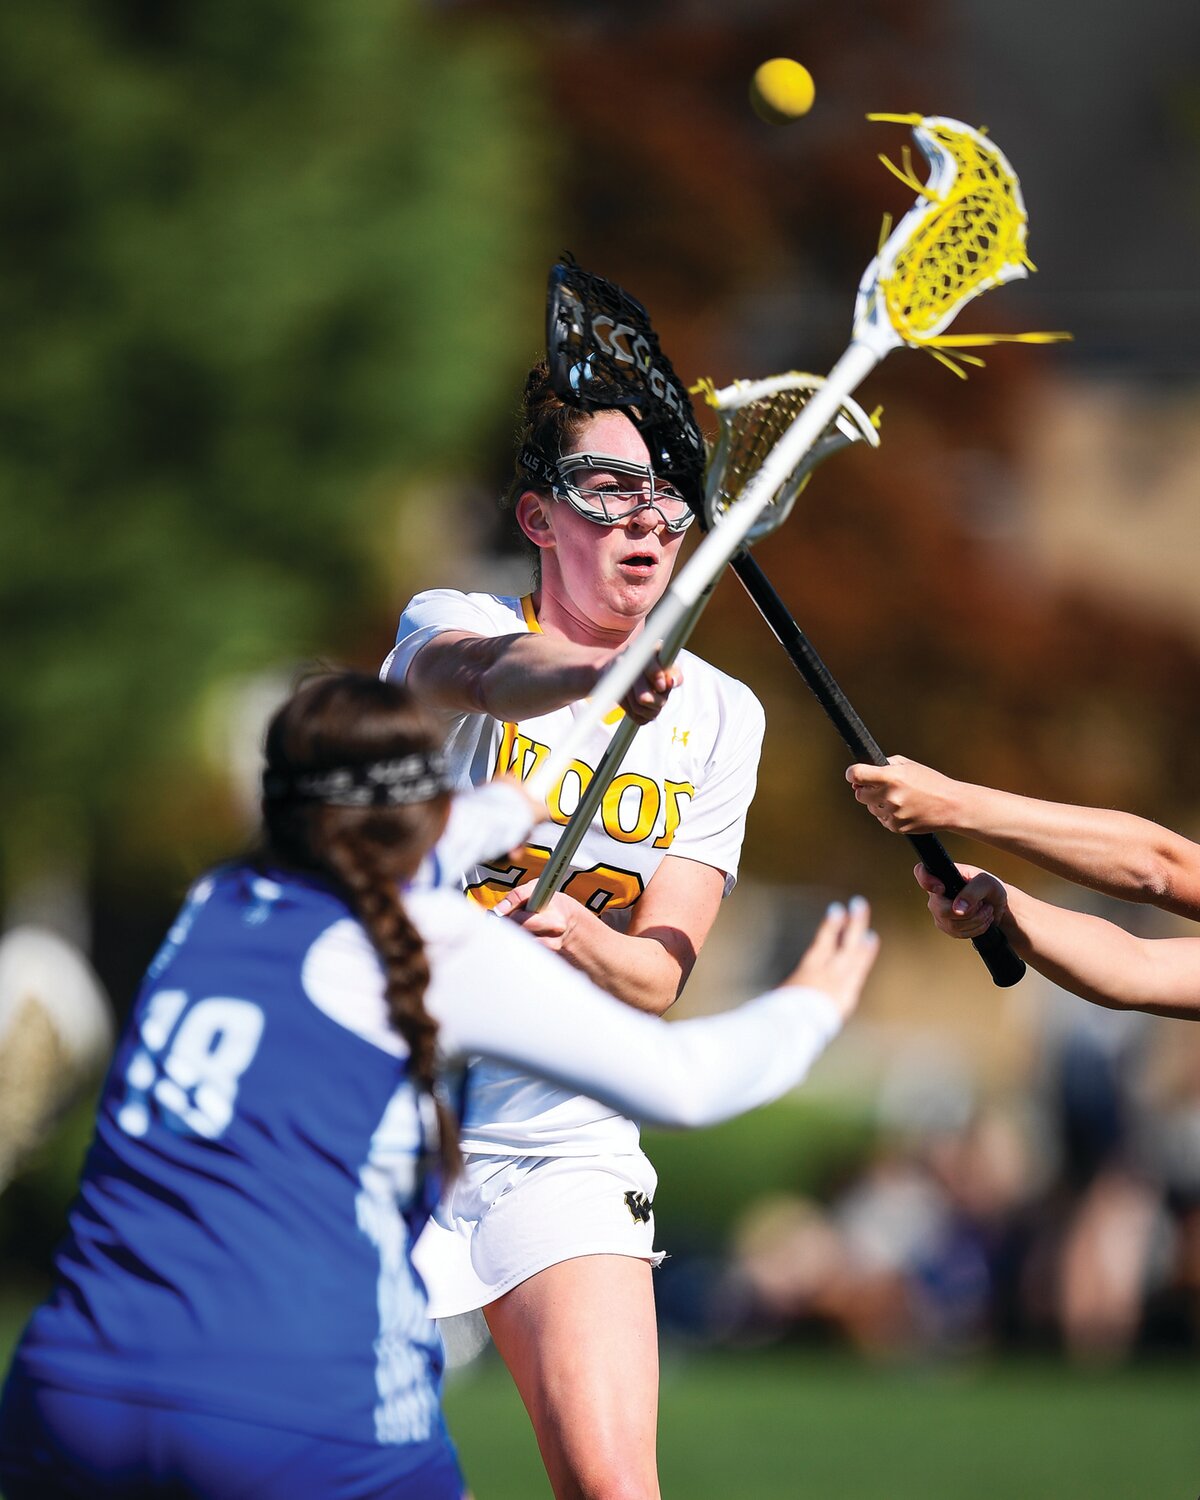 Archbishop Wood’s Grace Hoeger shoots and scores during the first period.